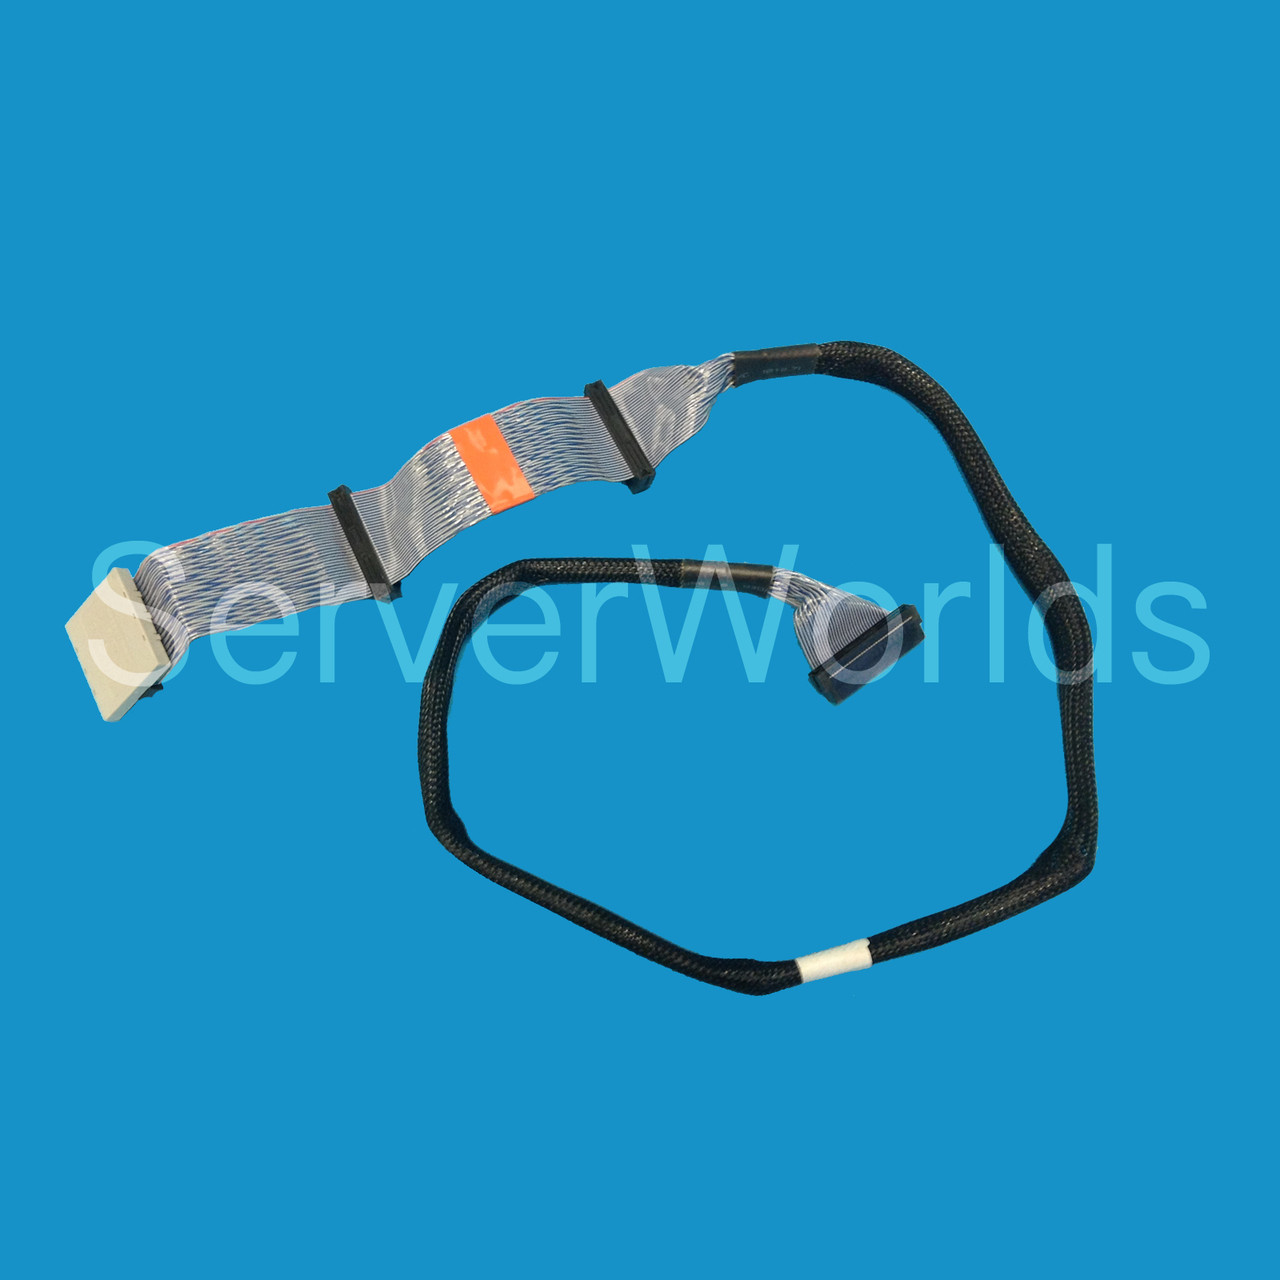 HP 148785-014 ML 330 G3 LVD SCSI Cable